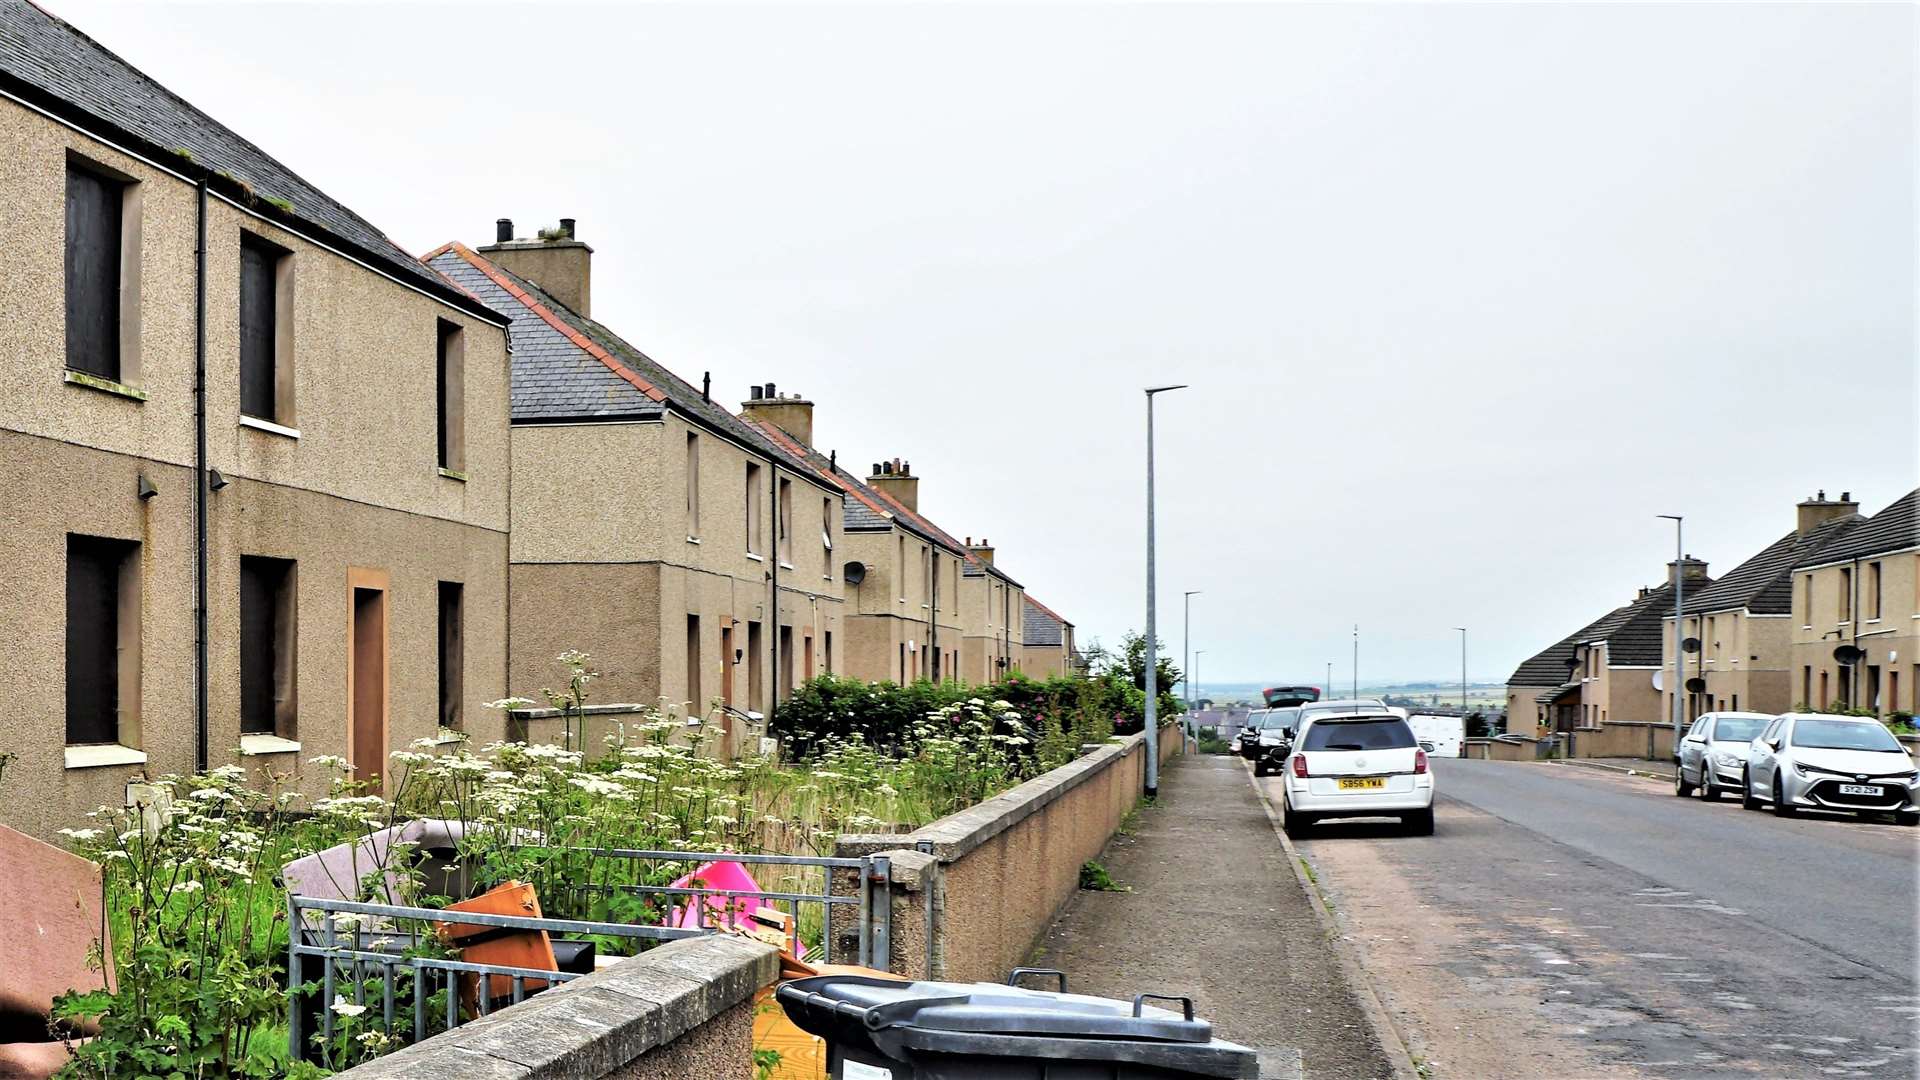 Council houses in the Far North. Picture: DGS